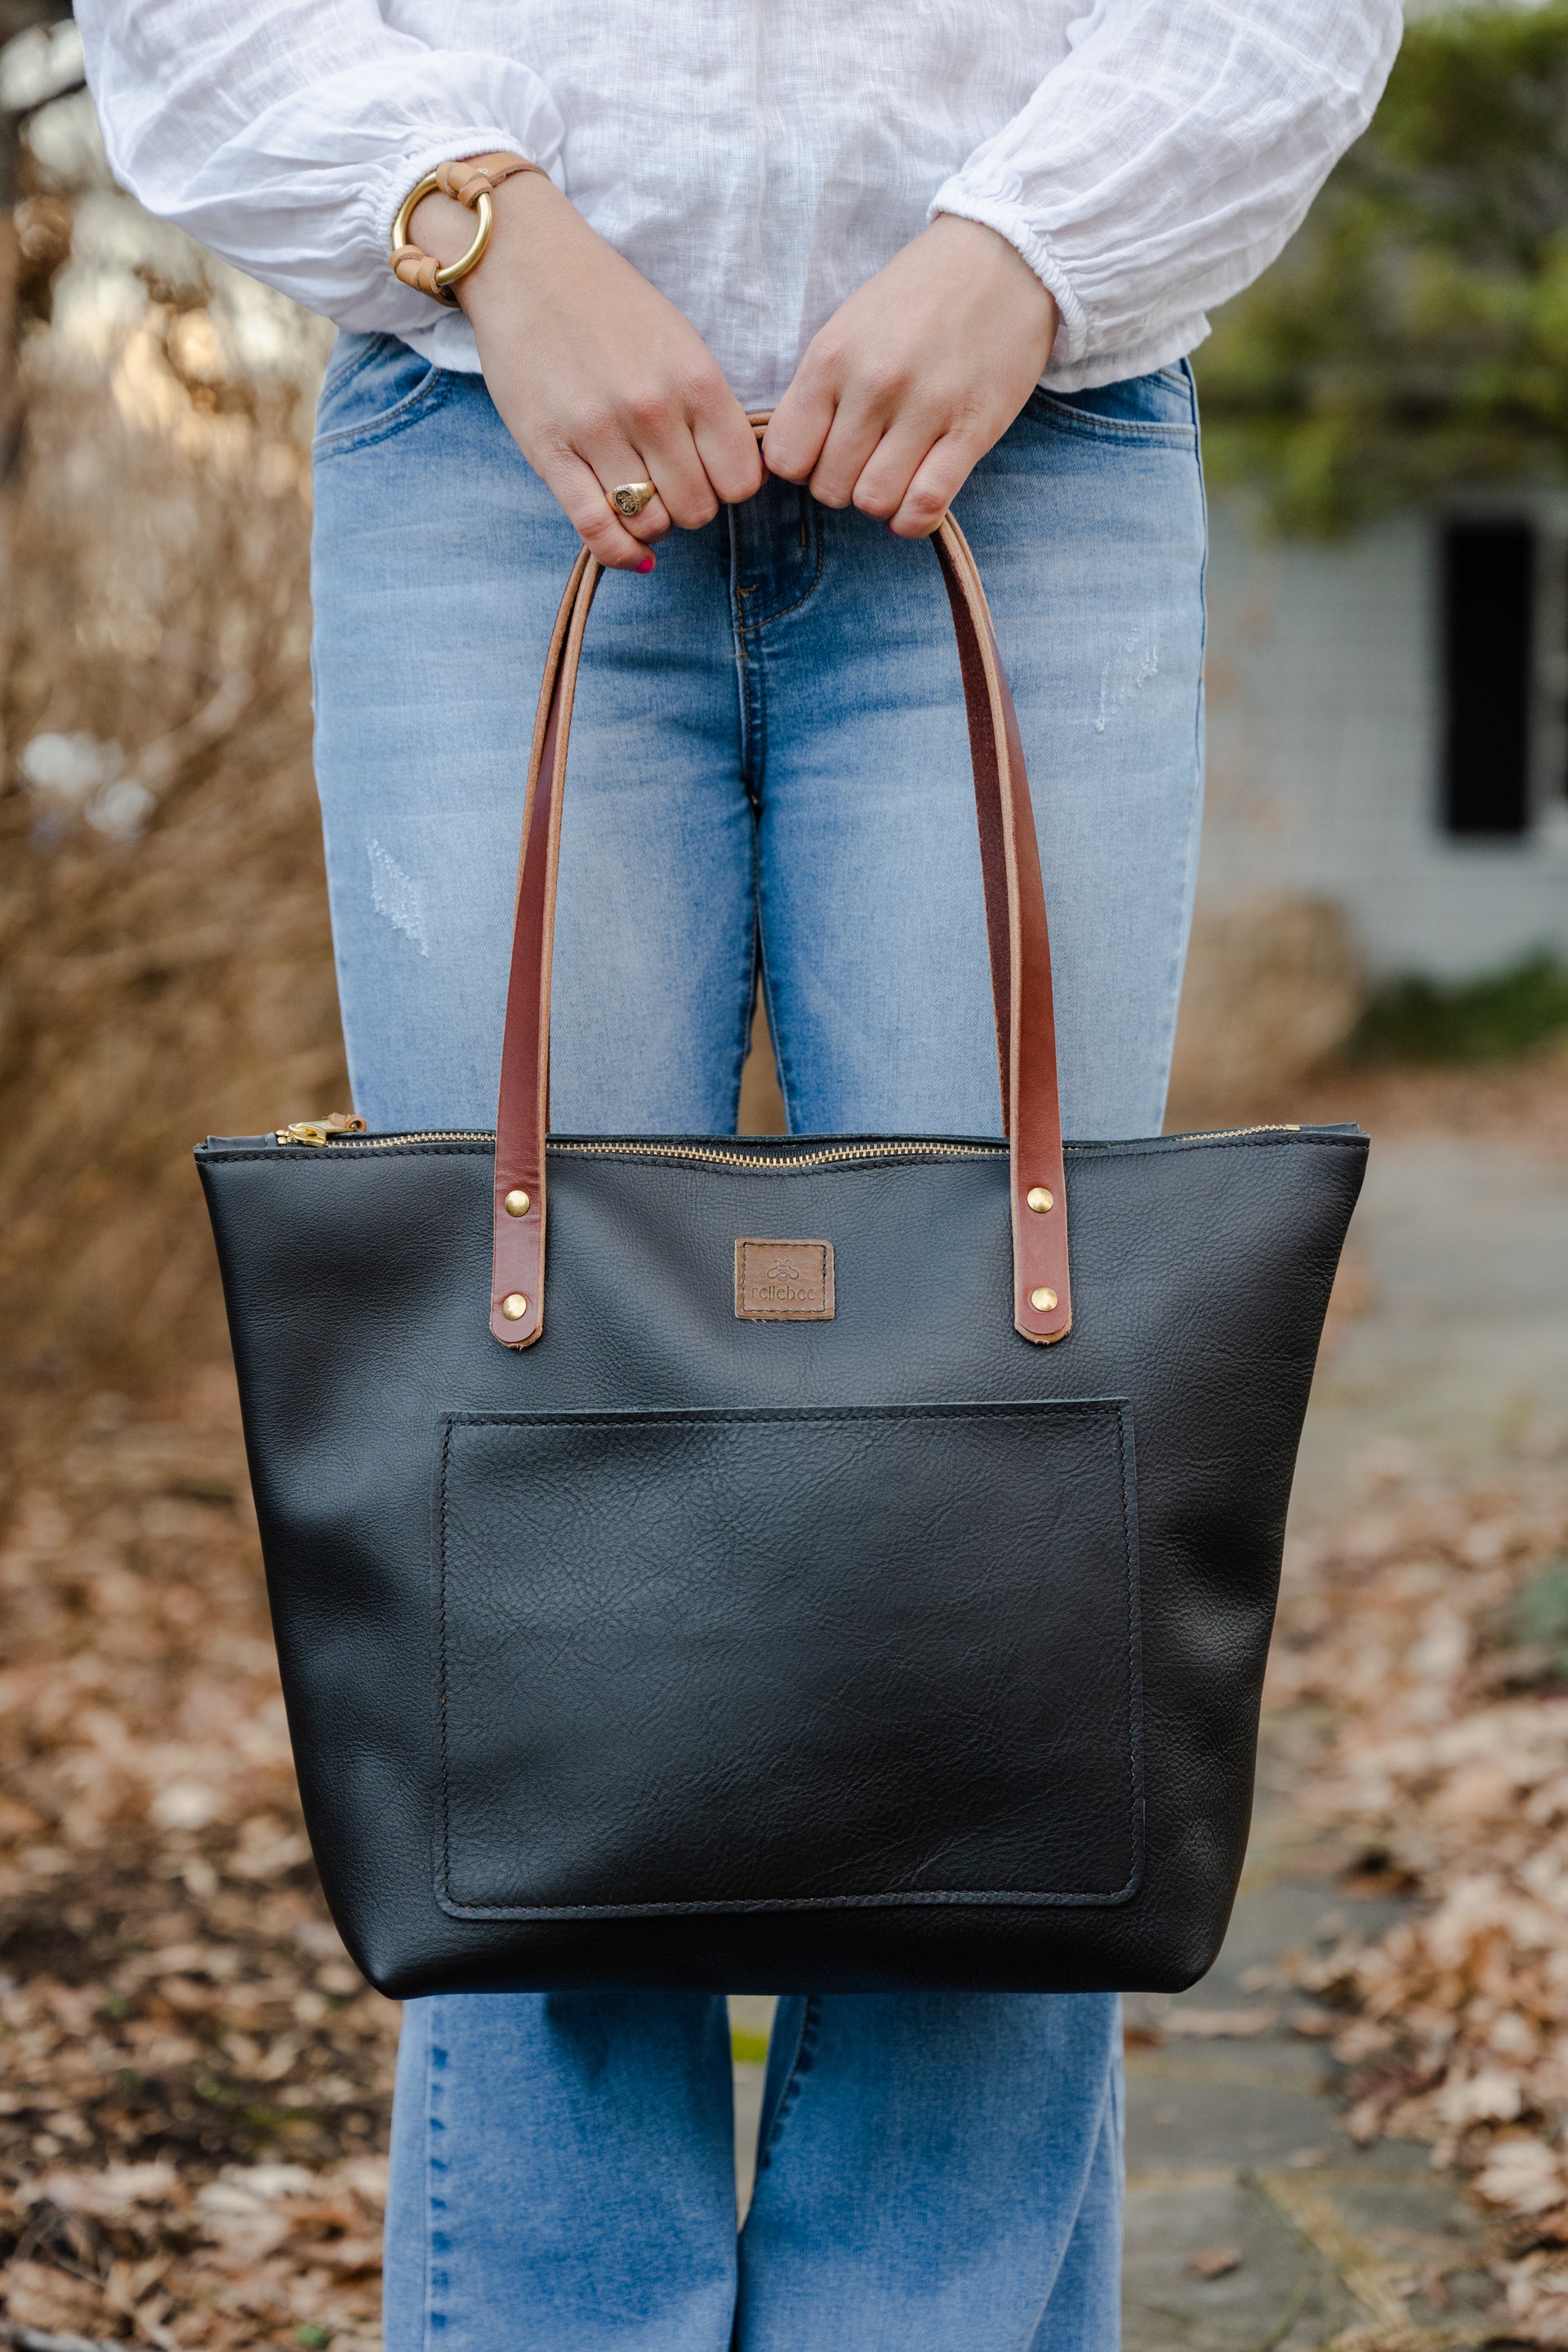 The Everyday Tote: Matte Black Hide